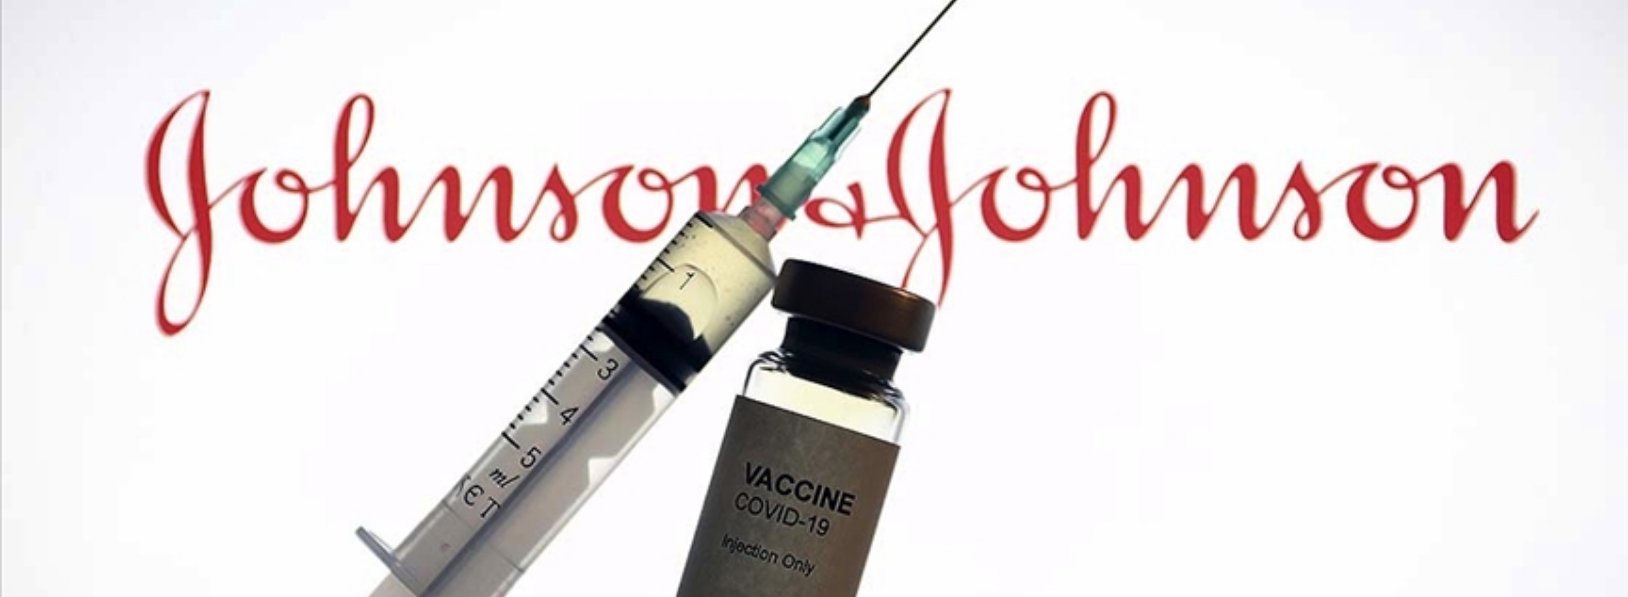 The US Food and Drug Administration has issued authorization for the Johnson & Johnson Covid-109 vaccine.